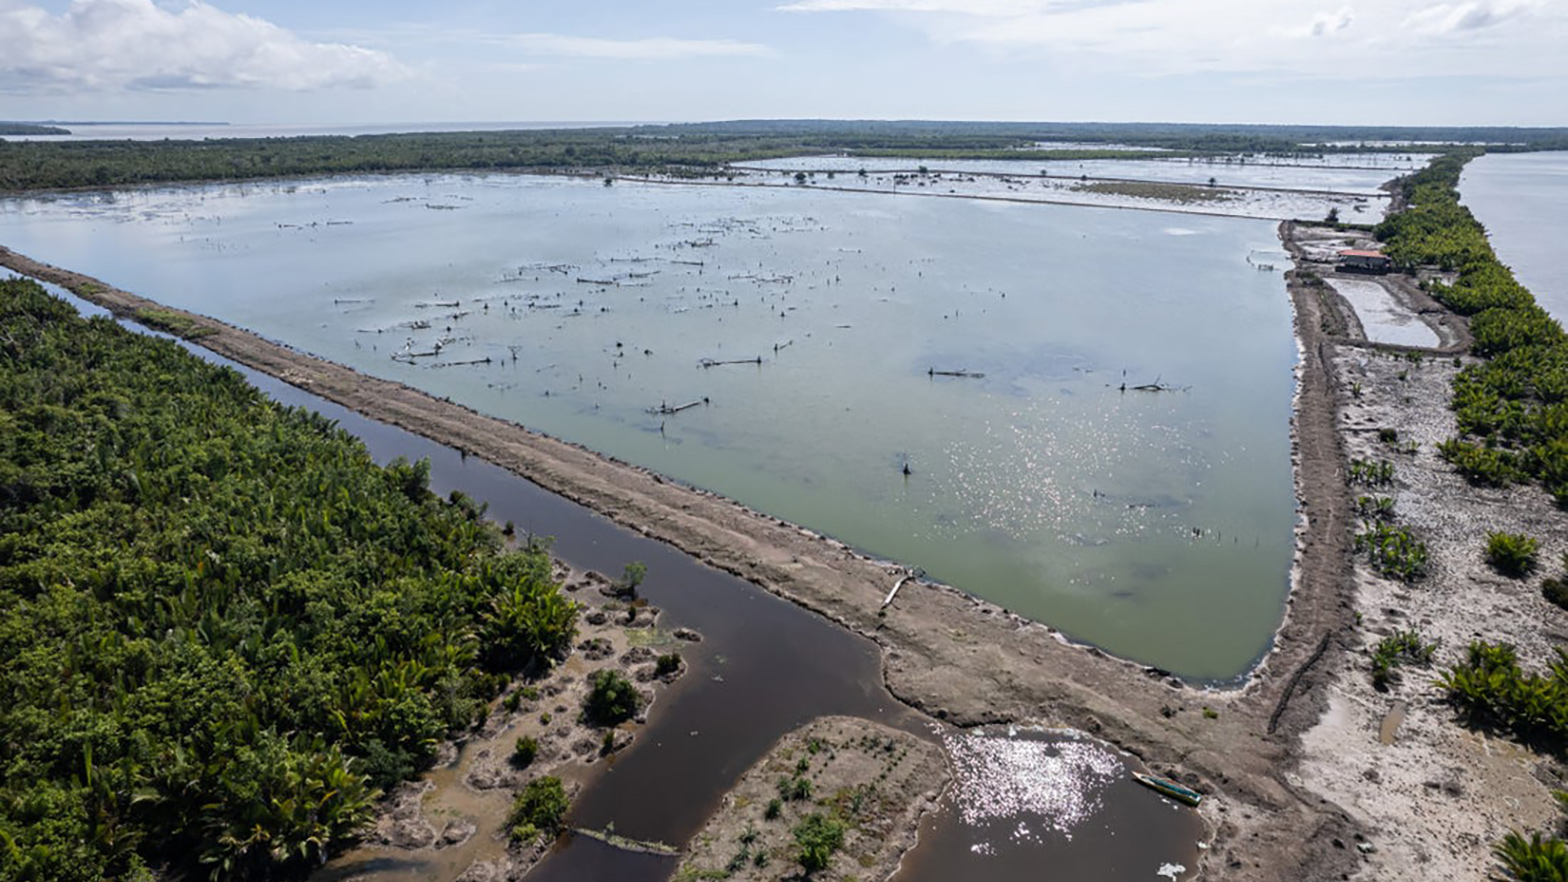  An area where mangroves have been cleared to form a shrimp pond. Photo courtesy of Pact.